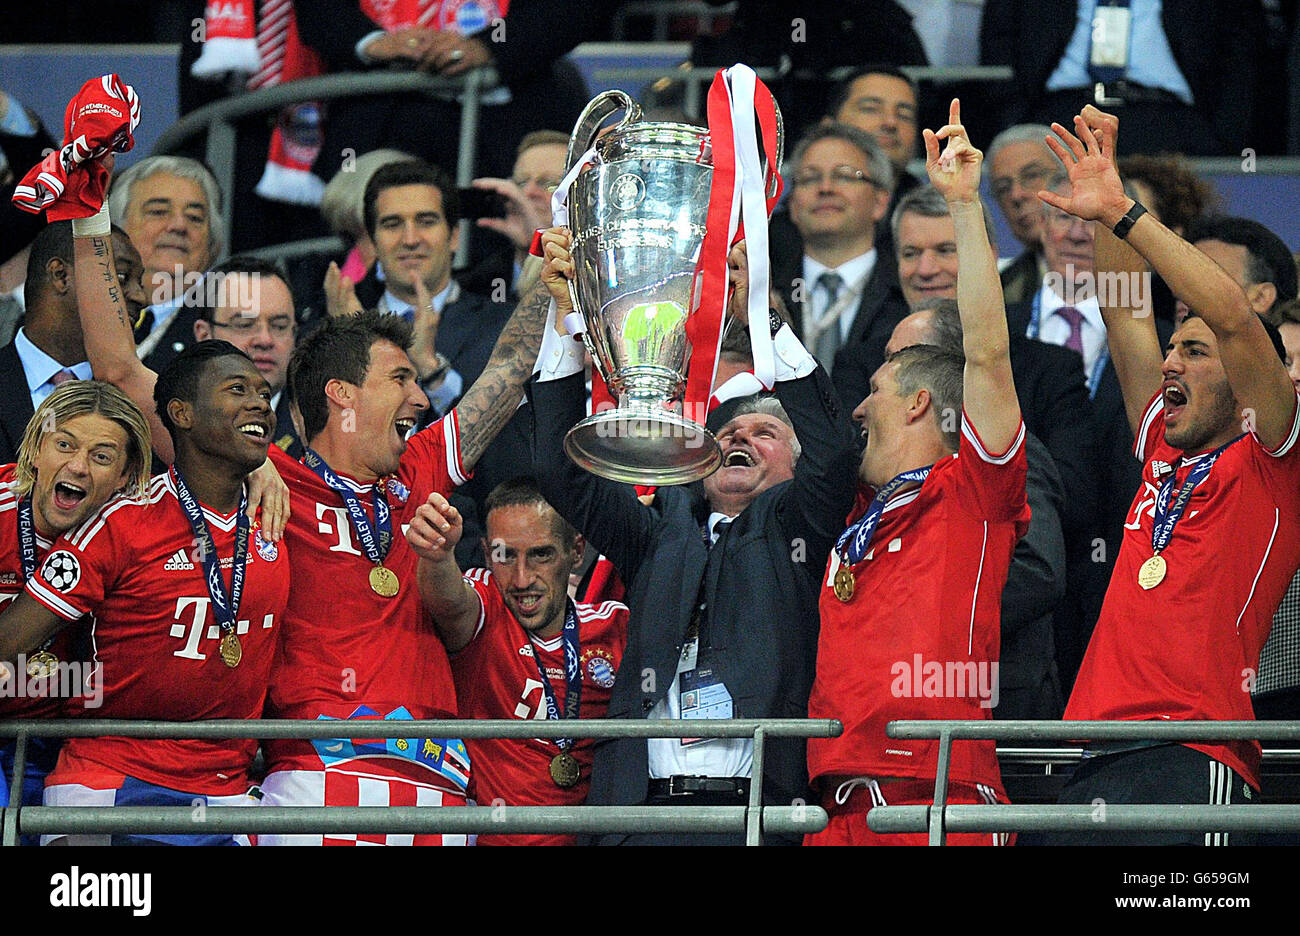 Bayern Munich manager Jupp Heynckes lifts the UEFA Champions League trophy with his team during the UEFA Champions League Final at Wembley Stadium, London. PRESS ASSOCIATION Photo. Picture date: Saturday May 25, 2013. See PA Story SOCCER Final. Photo credit should read: Martin Rickett/PA Wire. Stock Photo